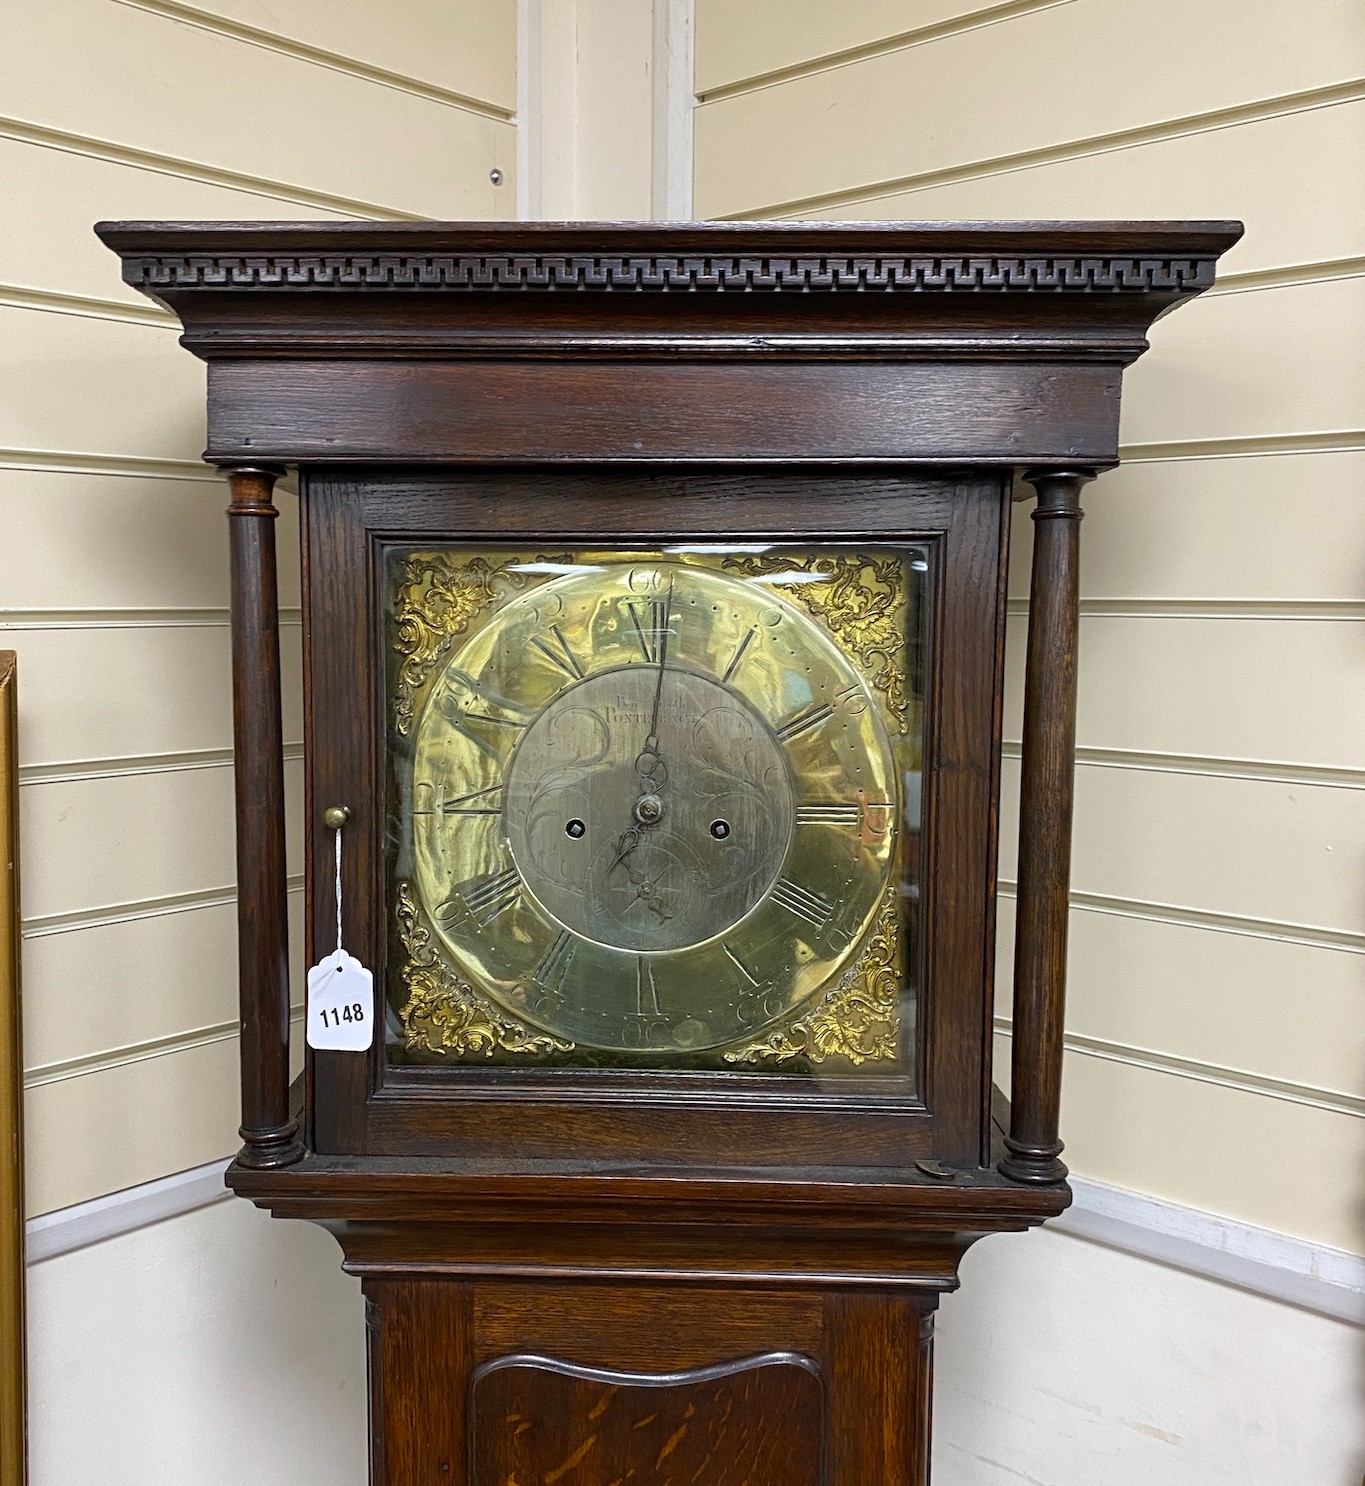 Benjamin Booth of Pontefract A George III oak cased 8-day brass and silver face longcase clock, height 193cm